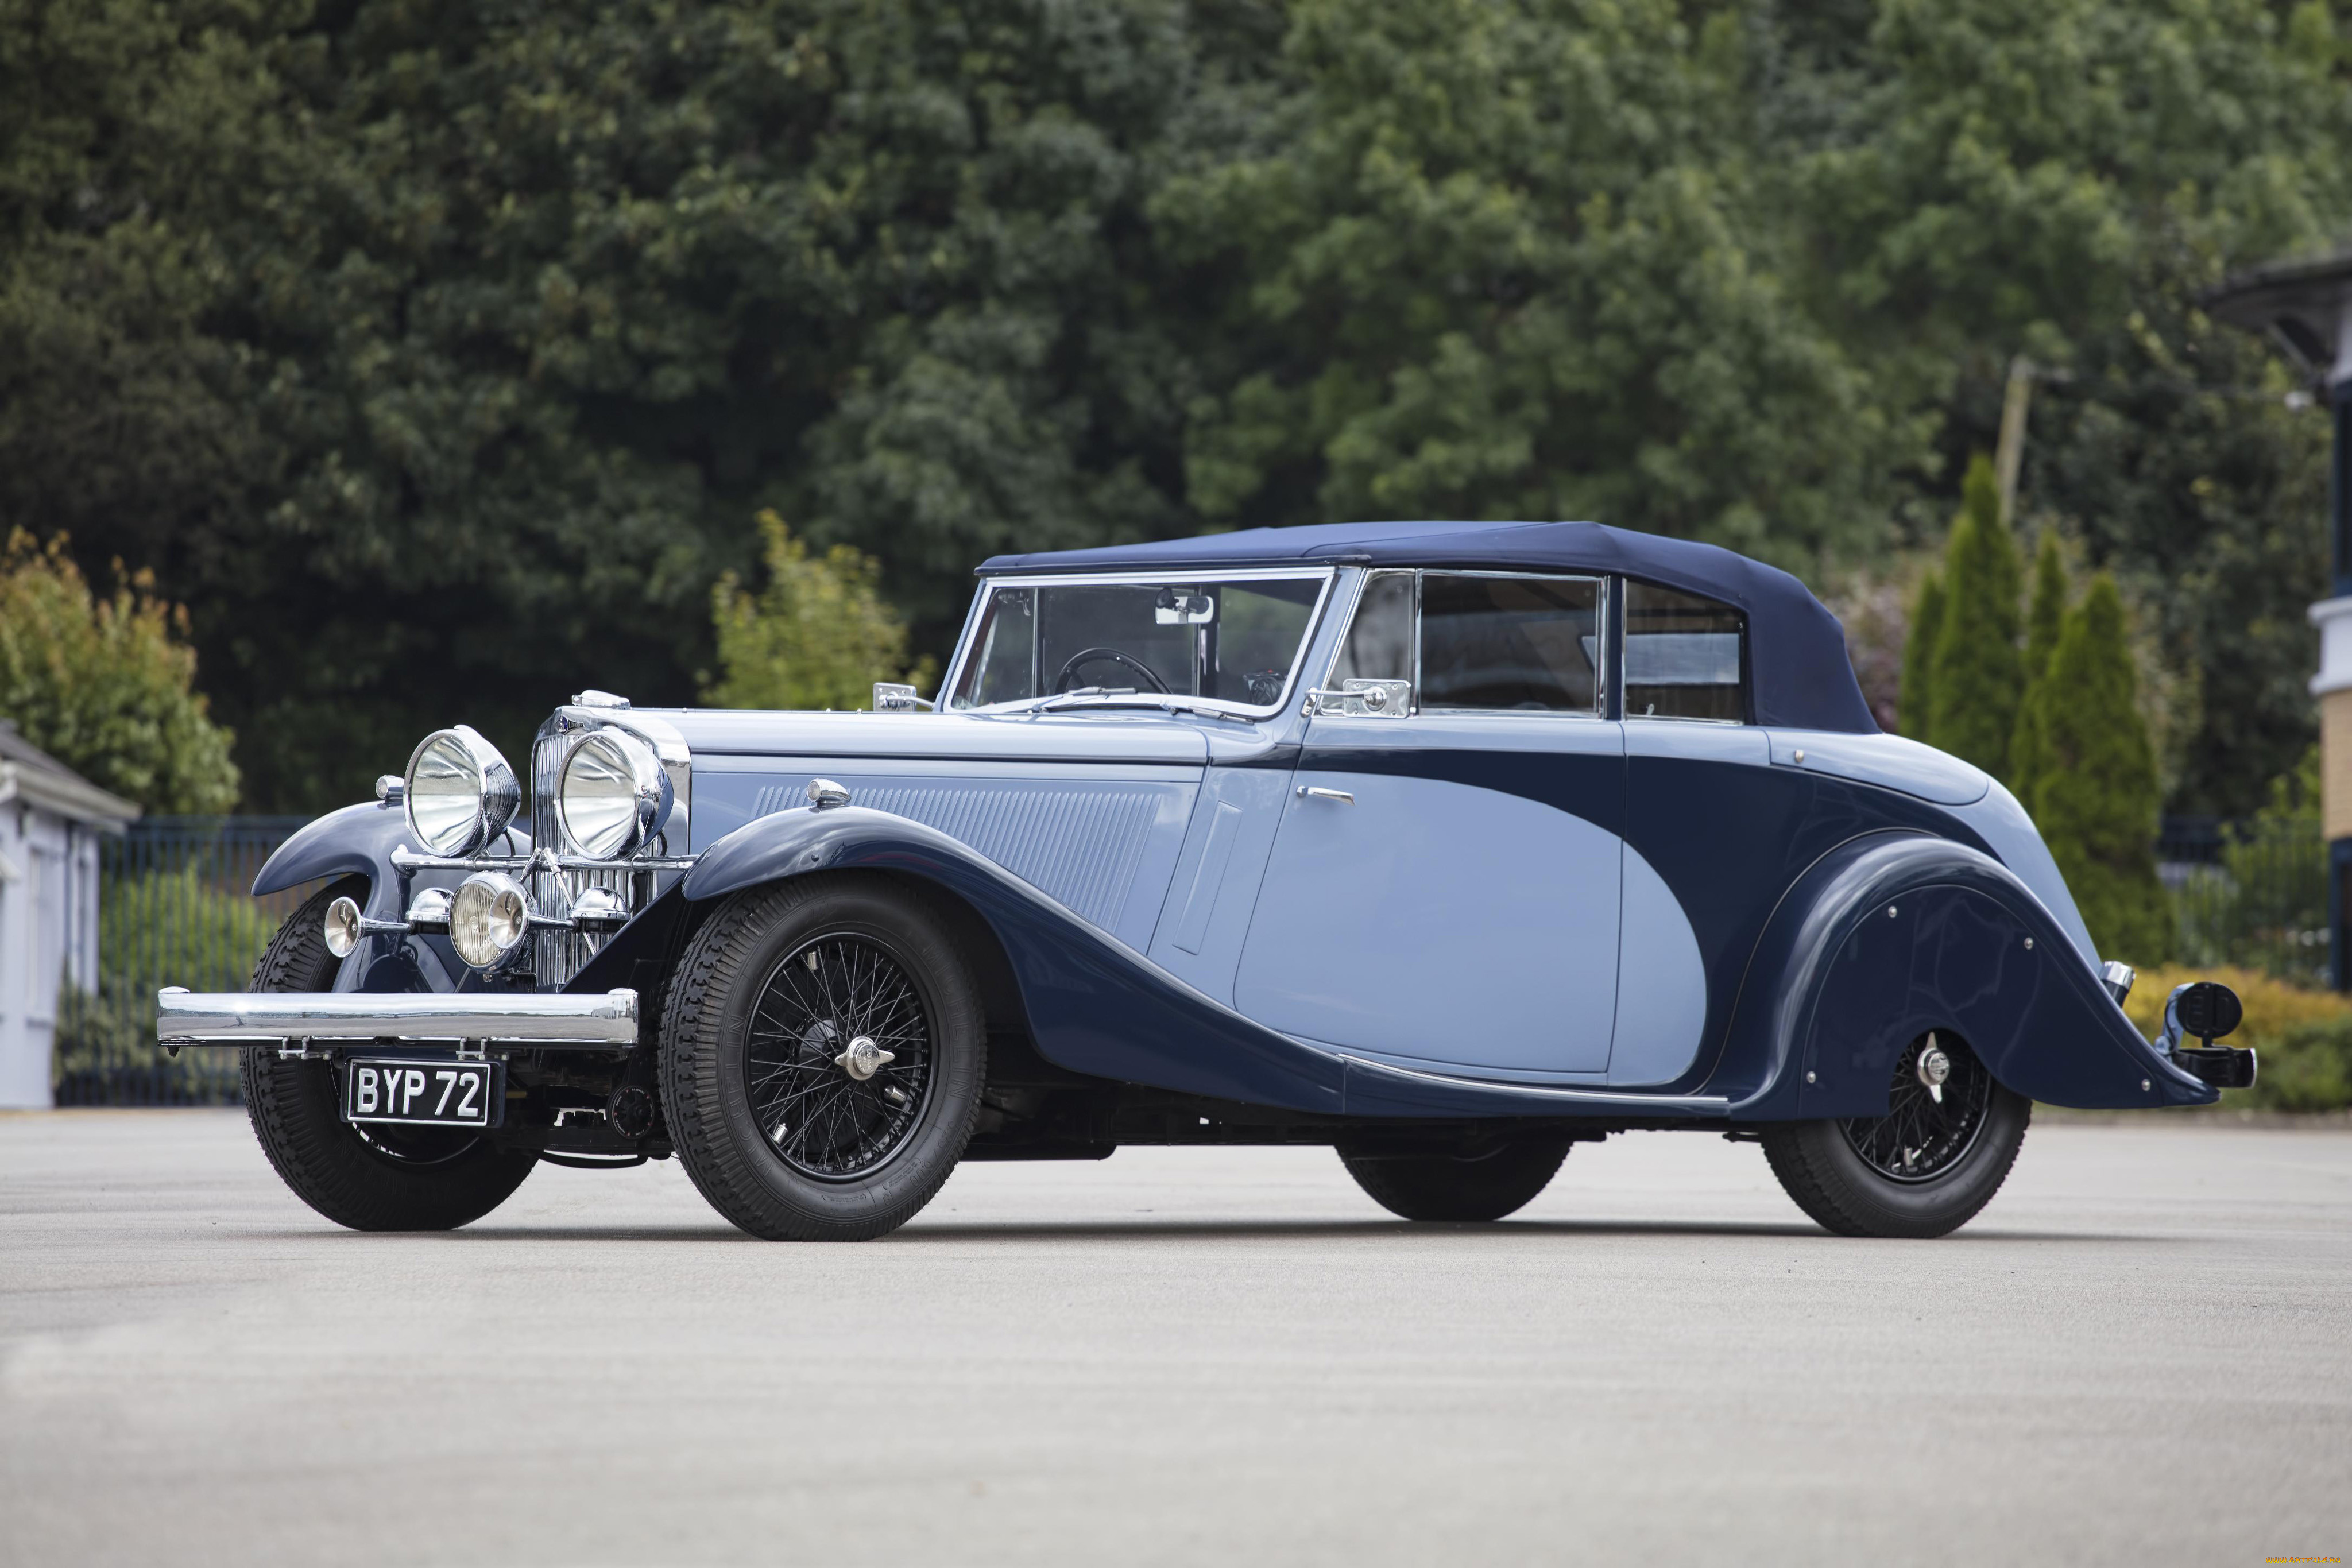 talbot 110 convertible by young, , talbot